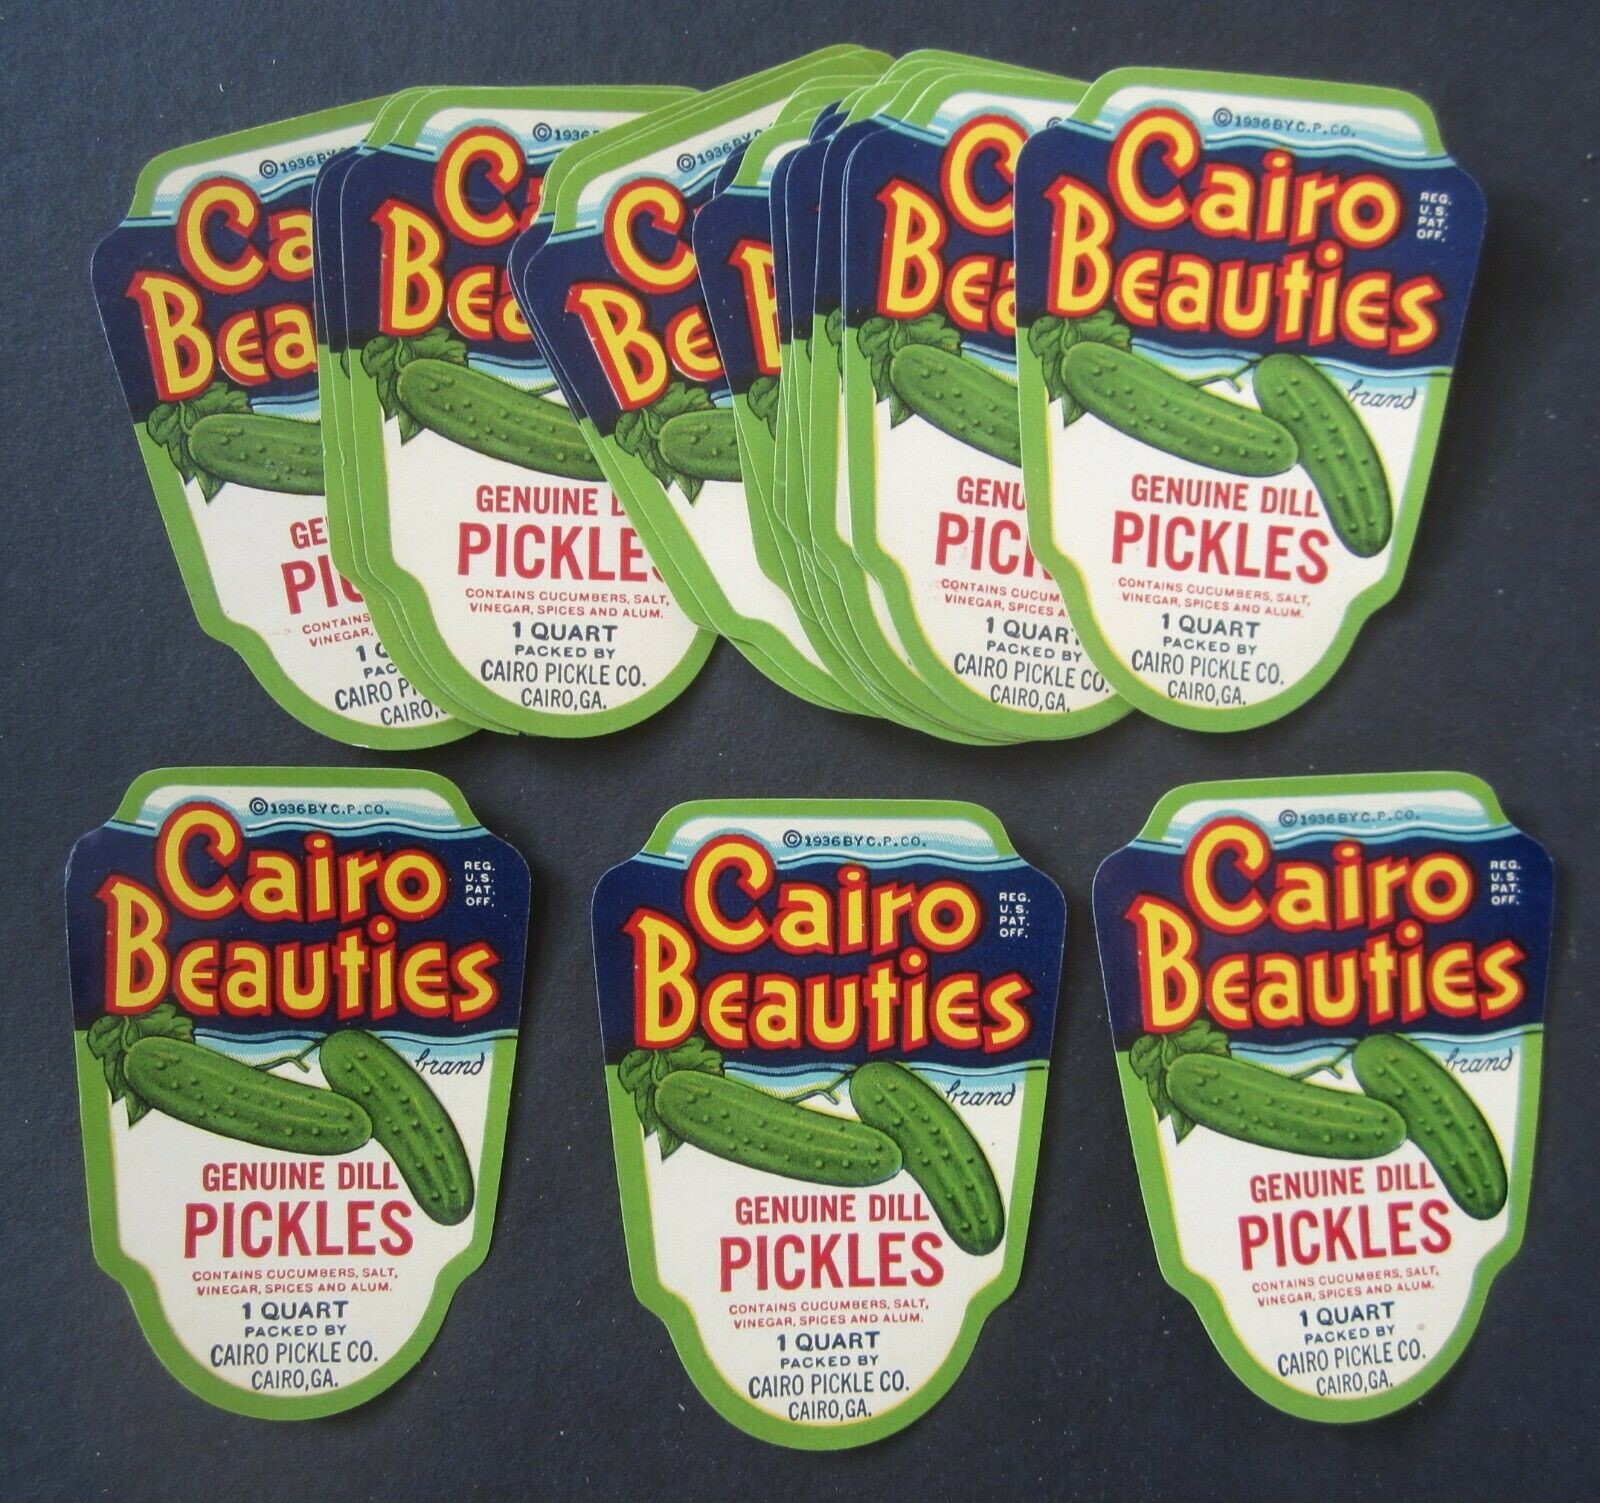  Lot of 25 Old 1936 - Cairo Beauties - PICKLE J...